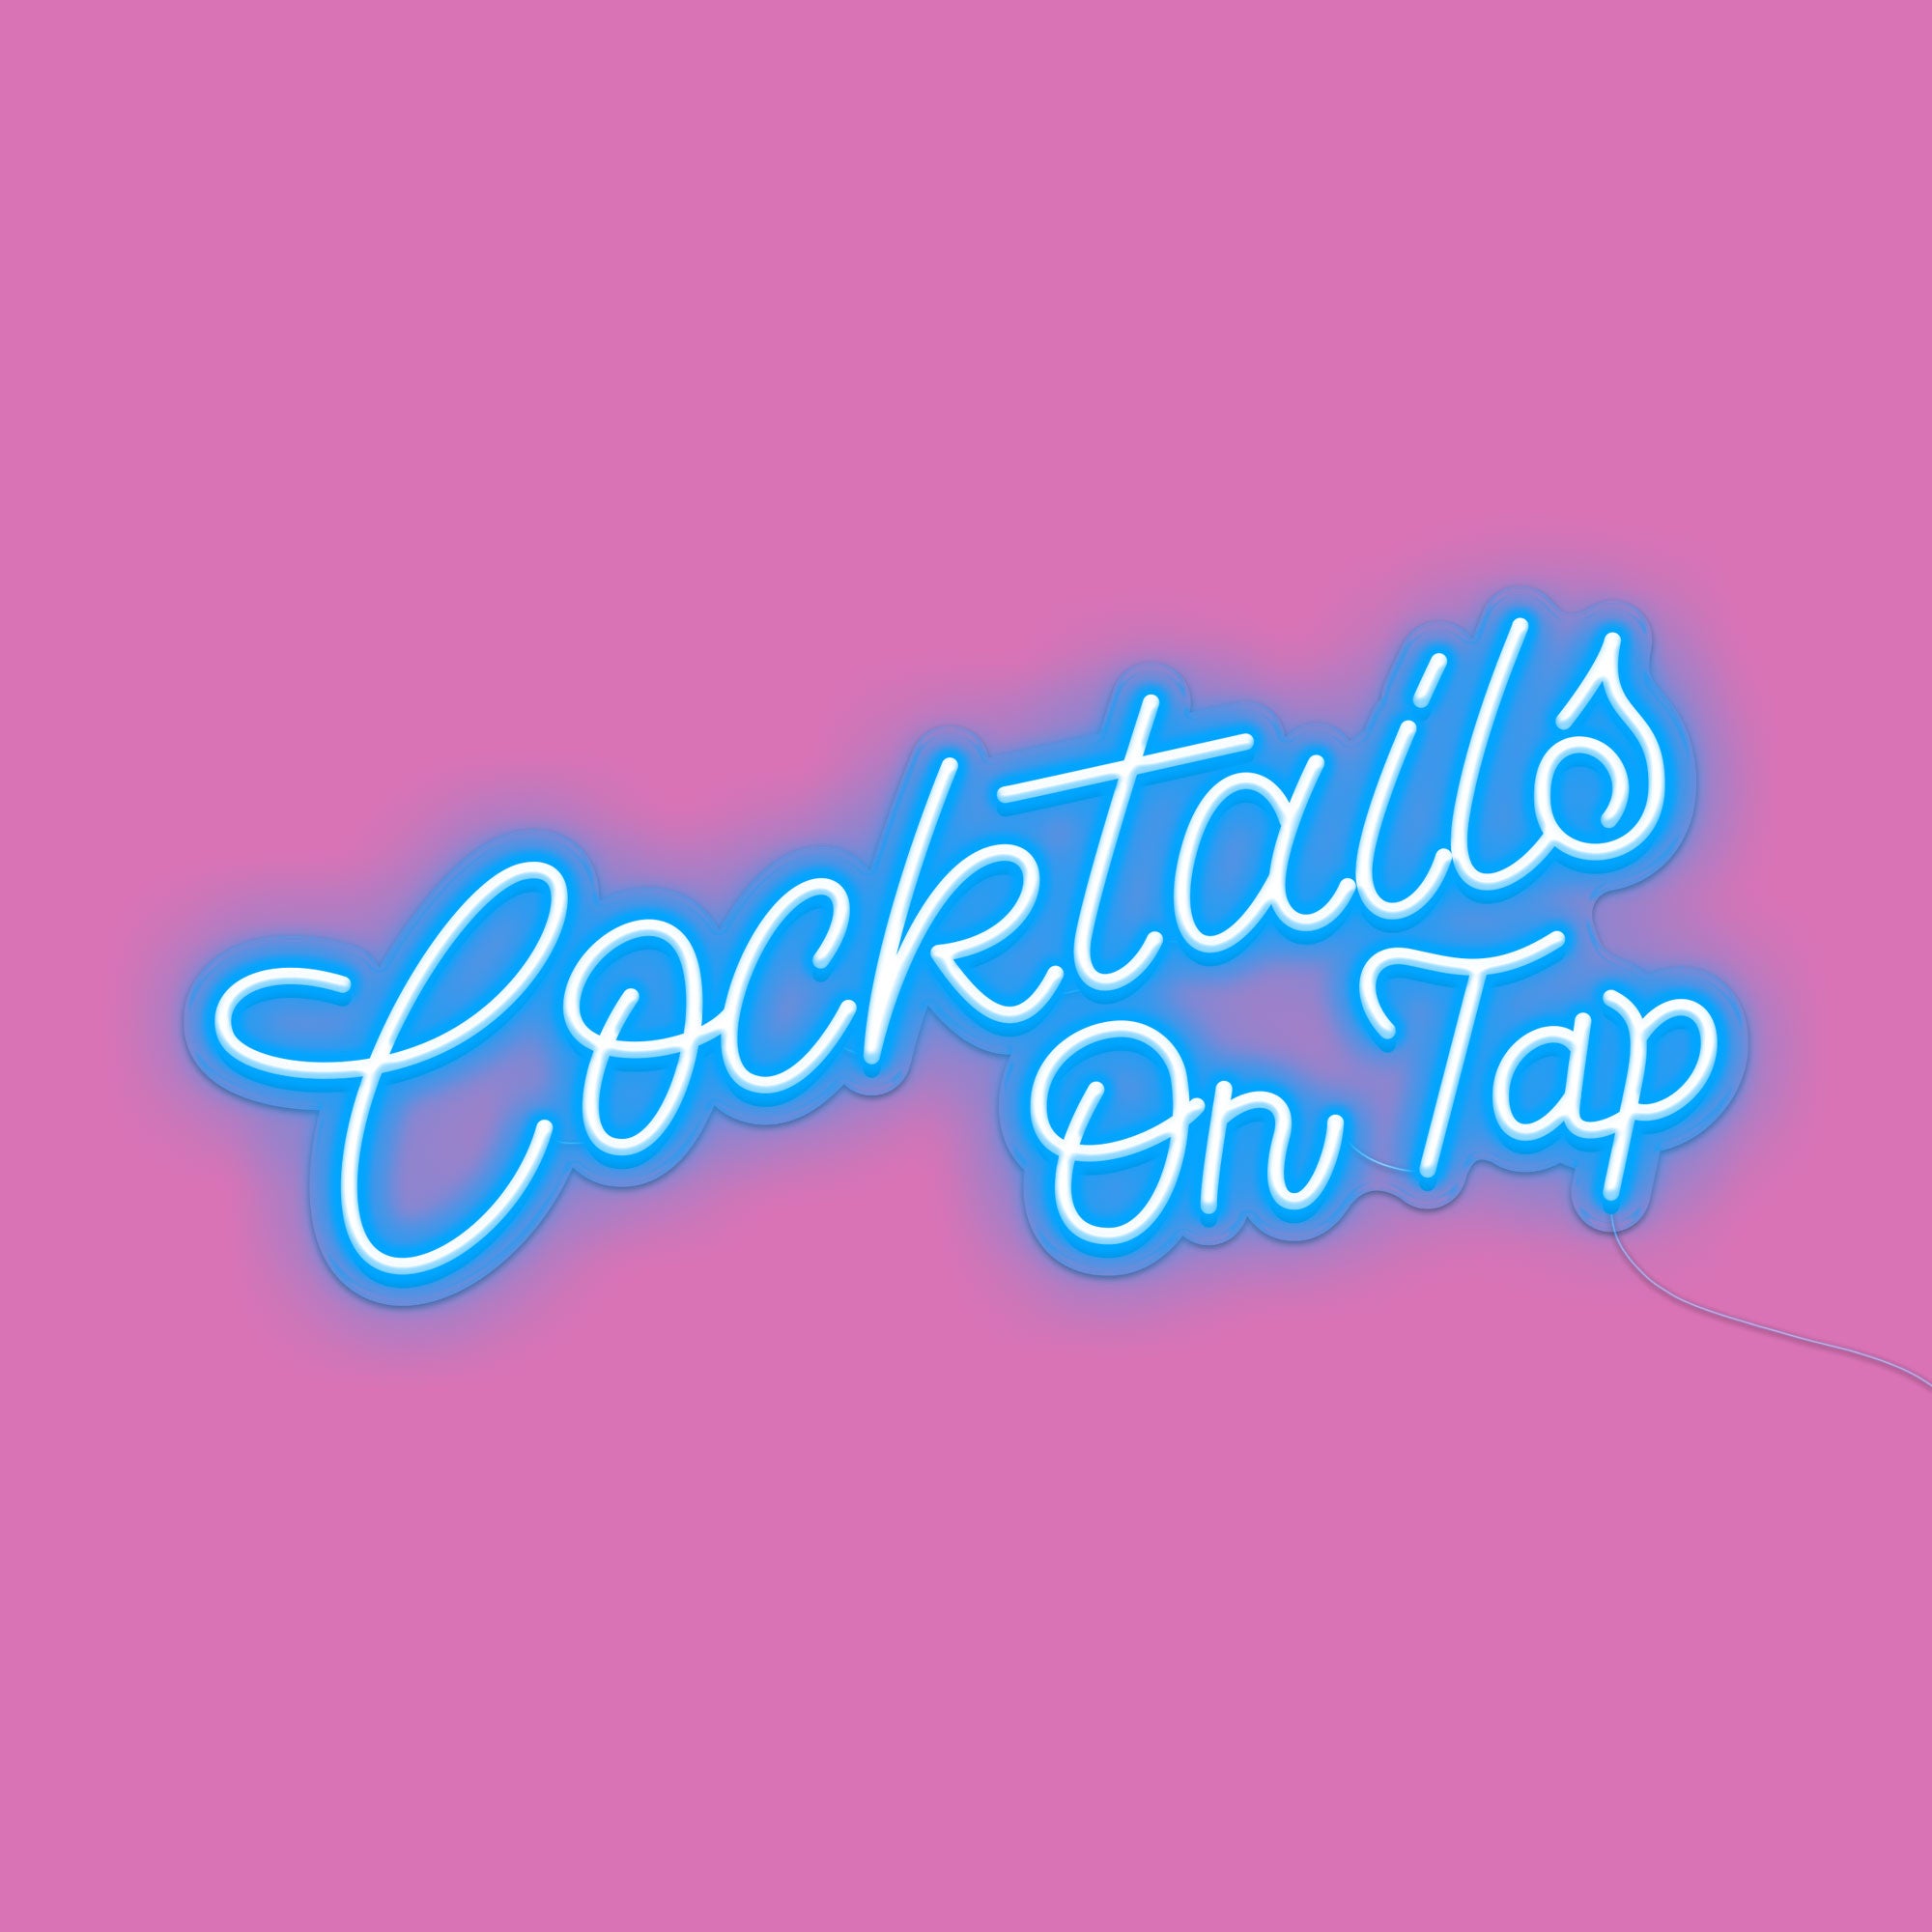 Cocktail On Tap Neon Bar Sign